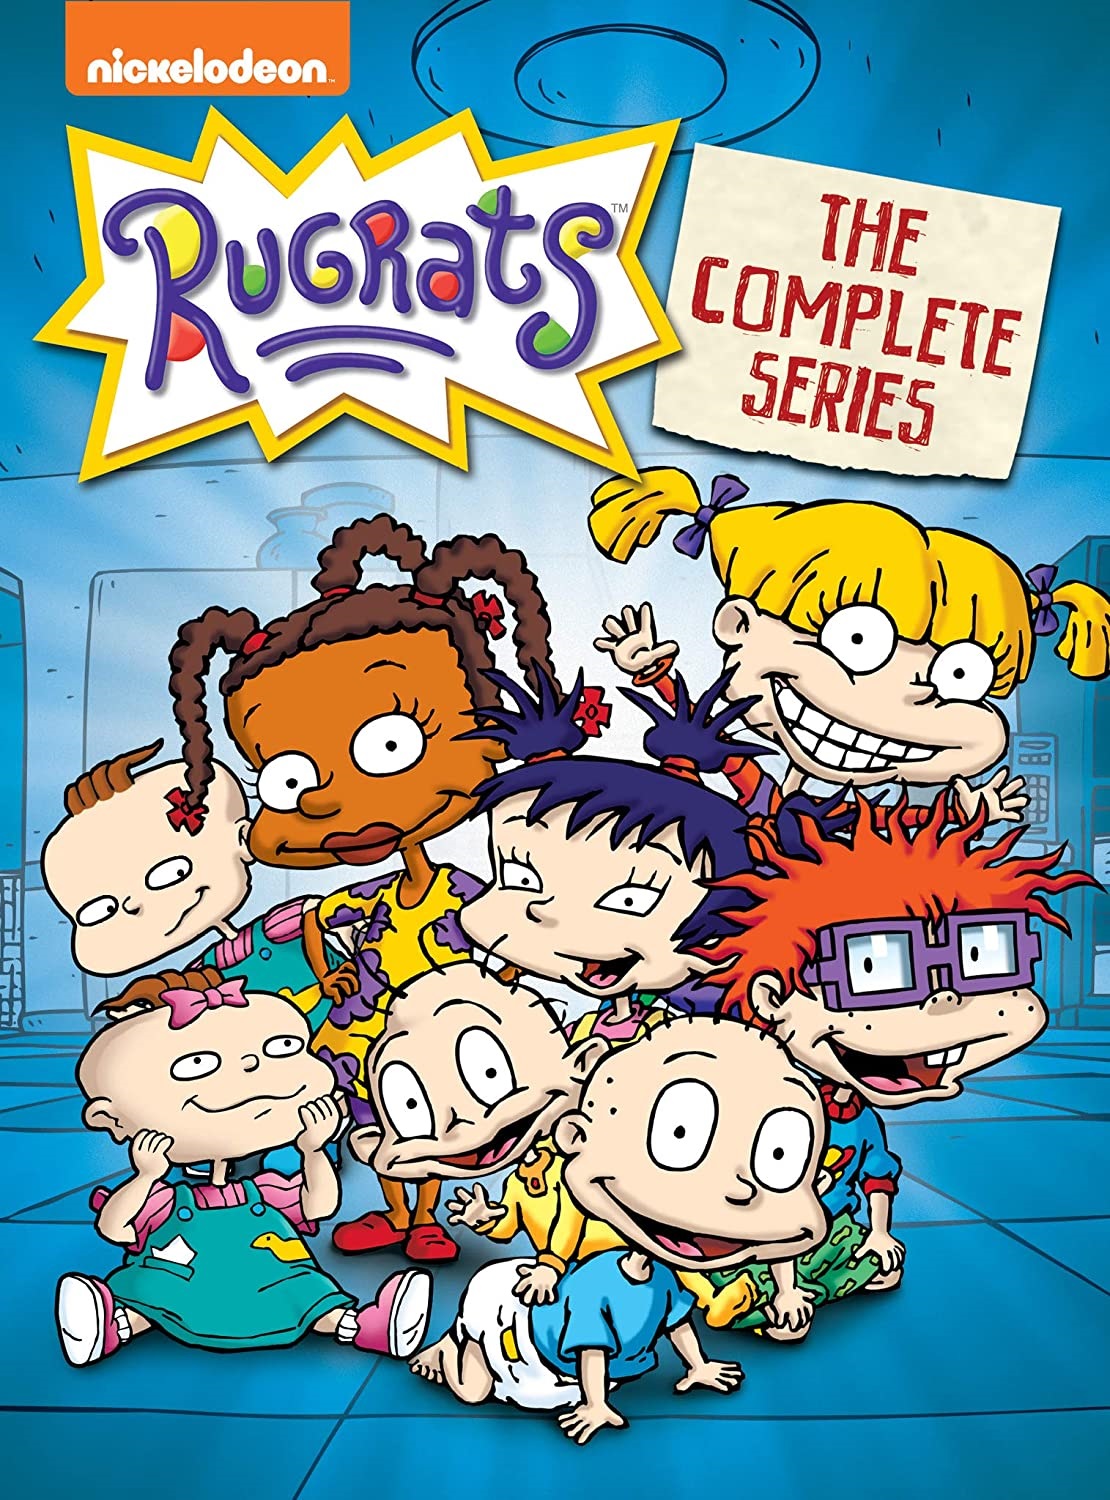 NickALive!: Nickelodeon to Release 'Rugrats: The Complete Series' DVD friends the complete series dvd